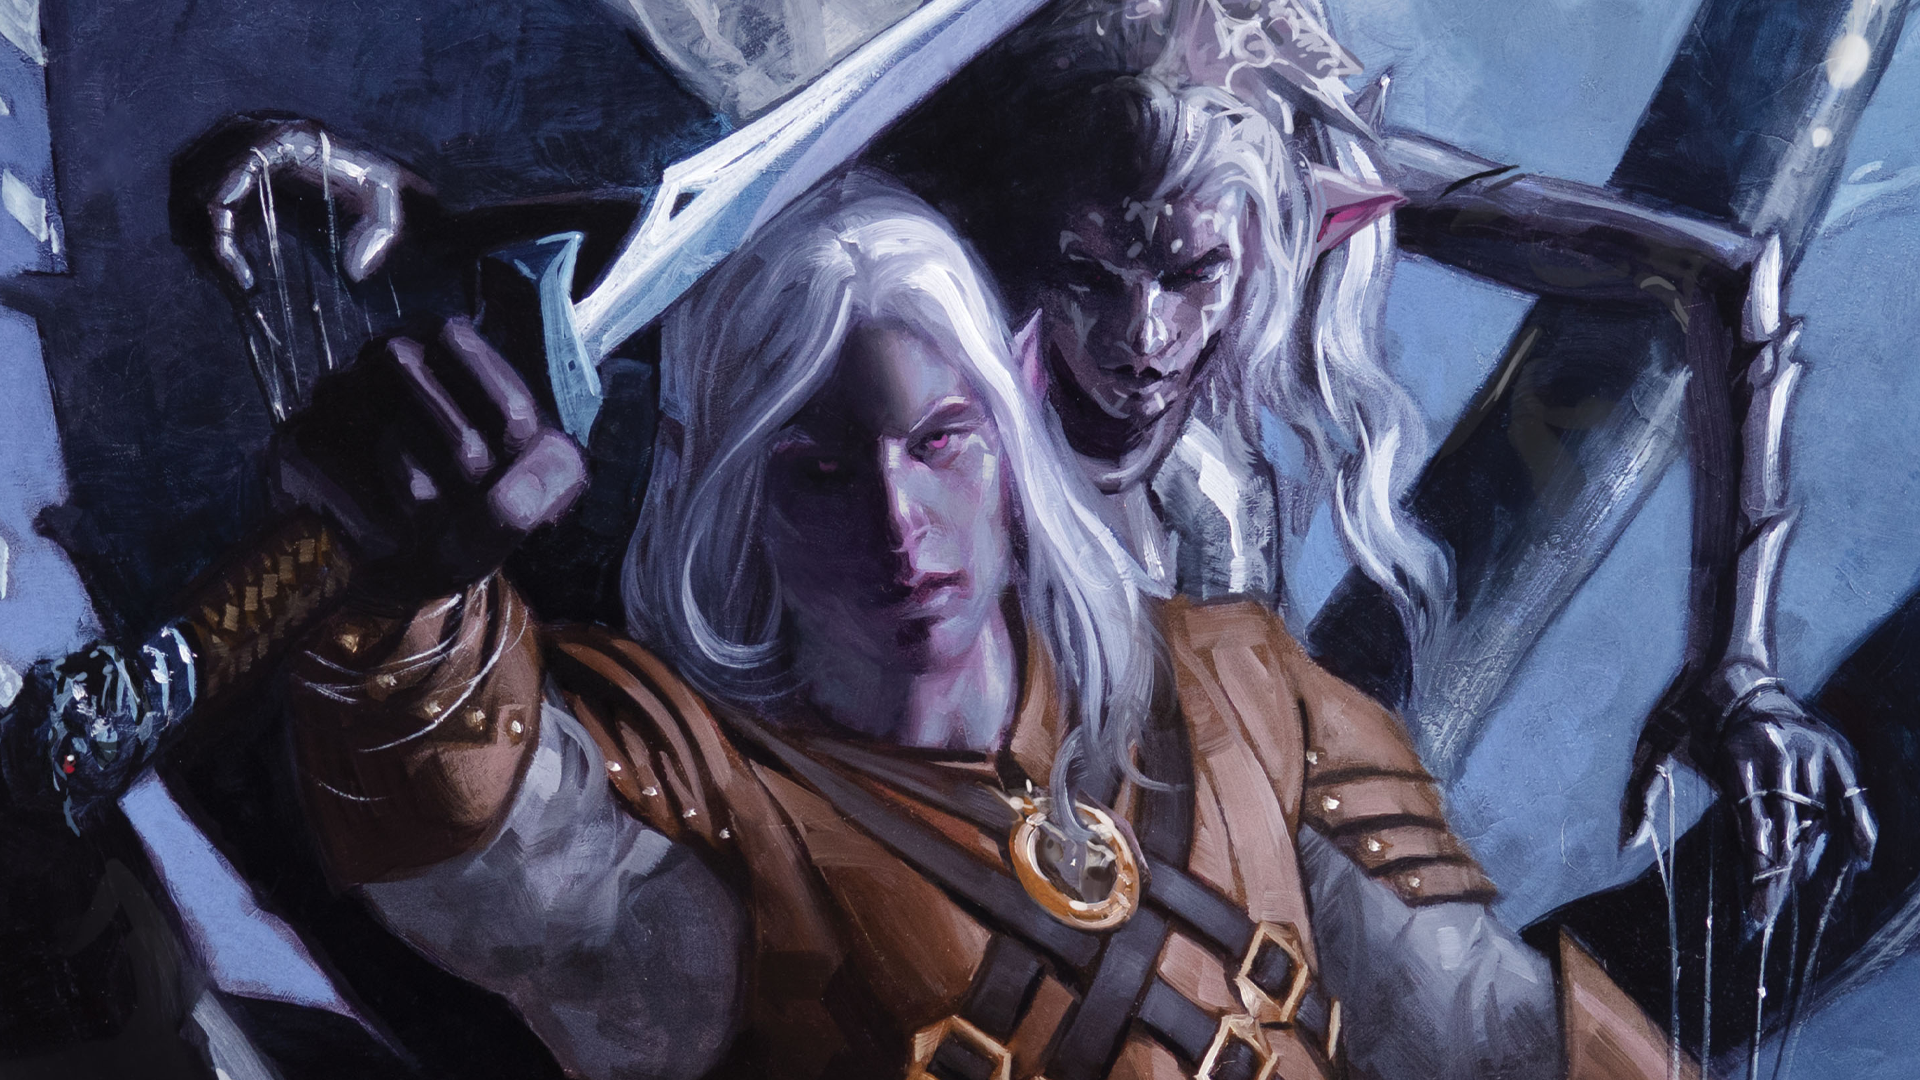 Image for Why every D&D fan should care about Drizzt Do’Urden, Forgotten Realms hero and one of the most important fantasy characters of all time